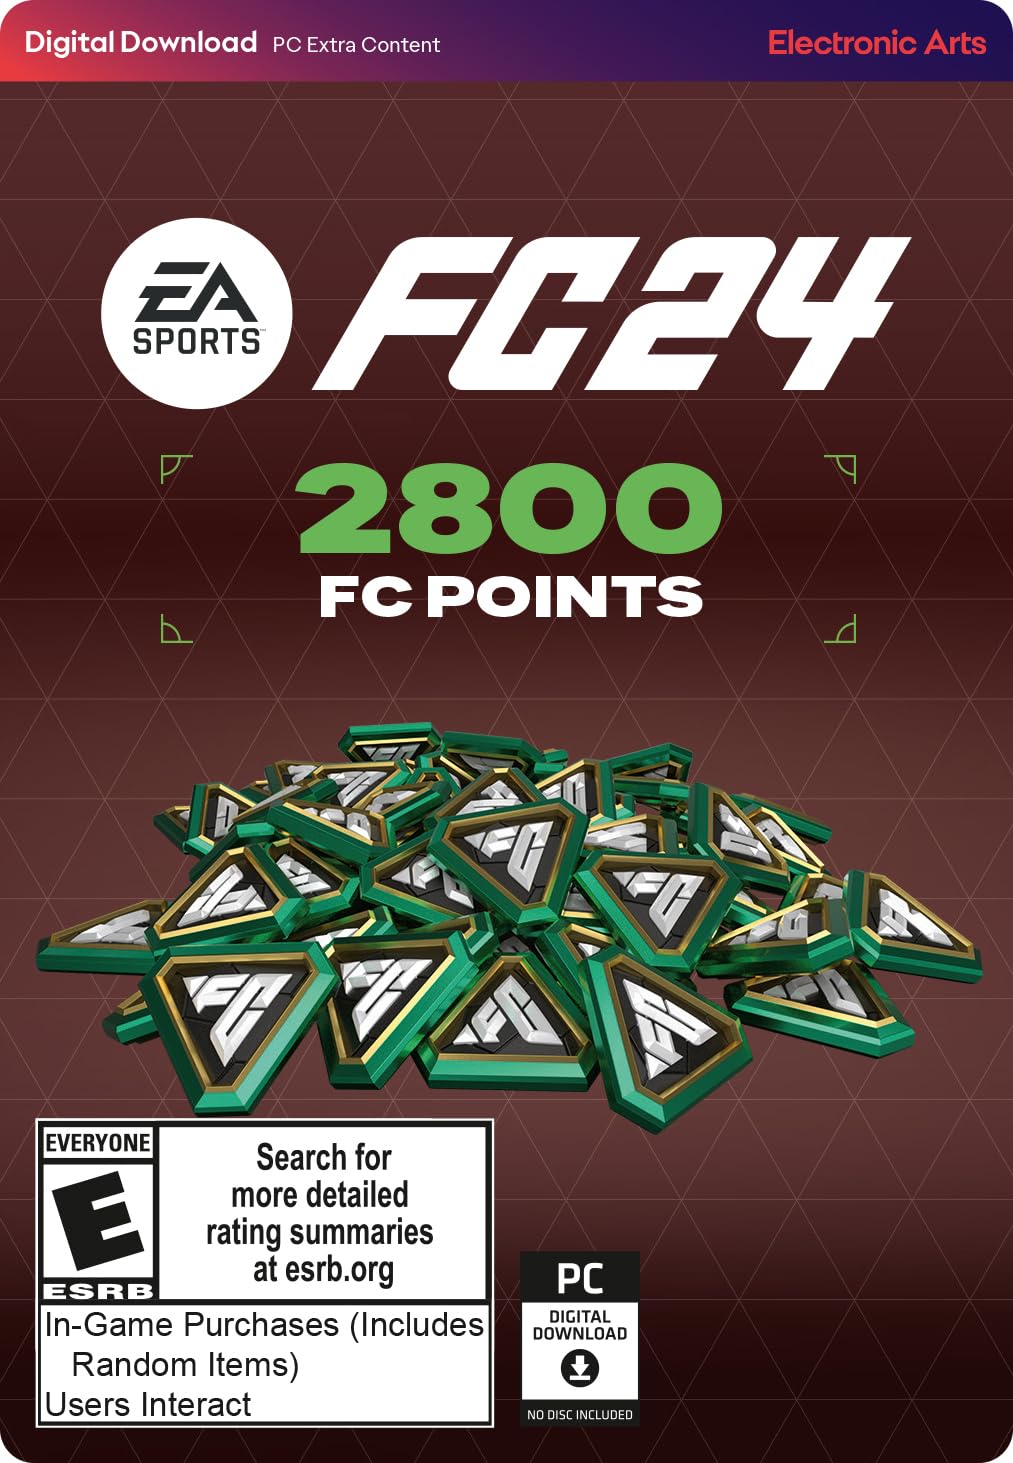 EA SPORTS FC 24 - 2800 Points - PC [Online Game Code]